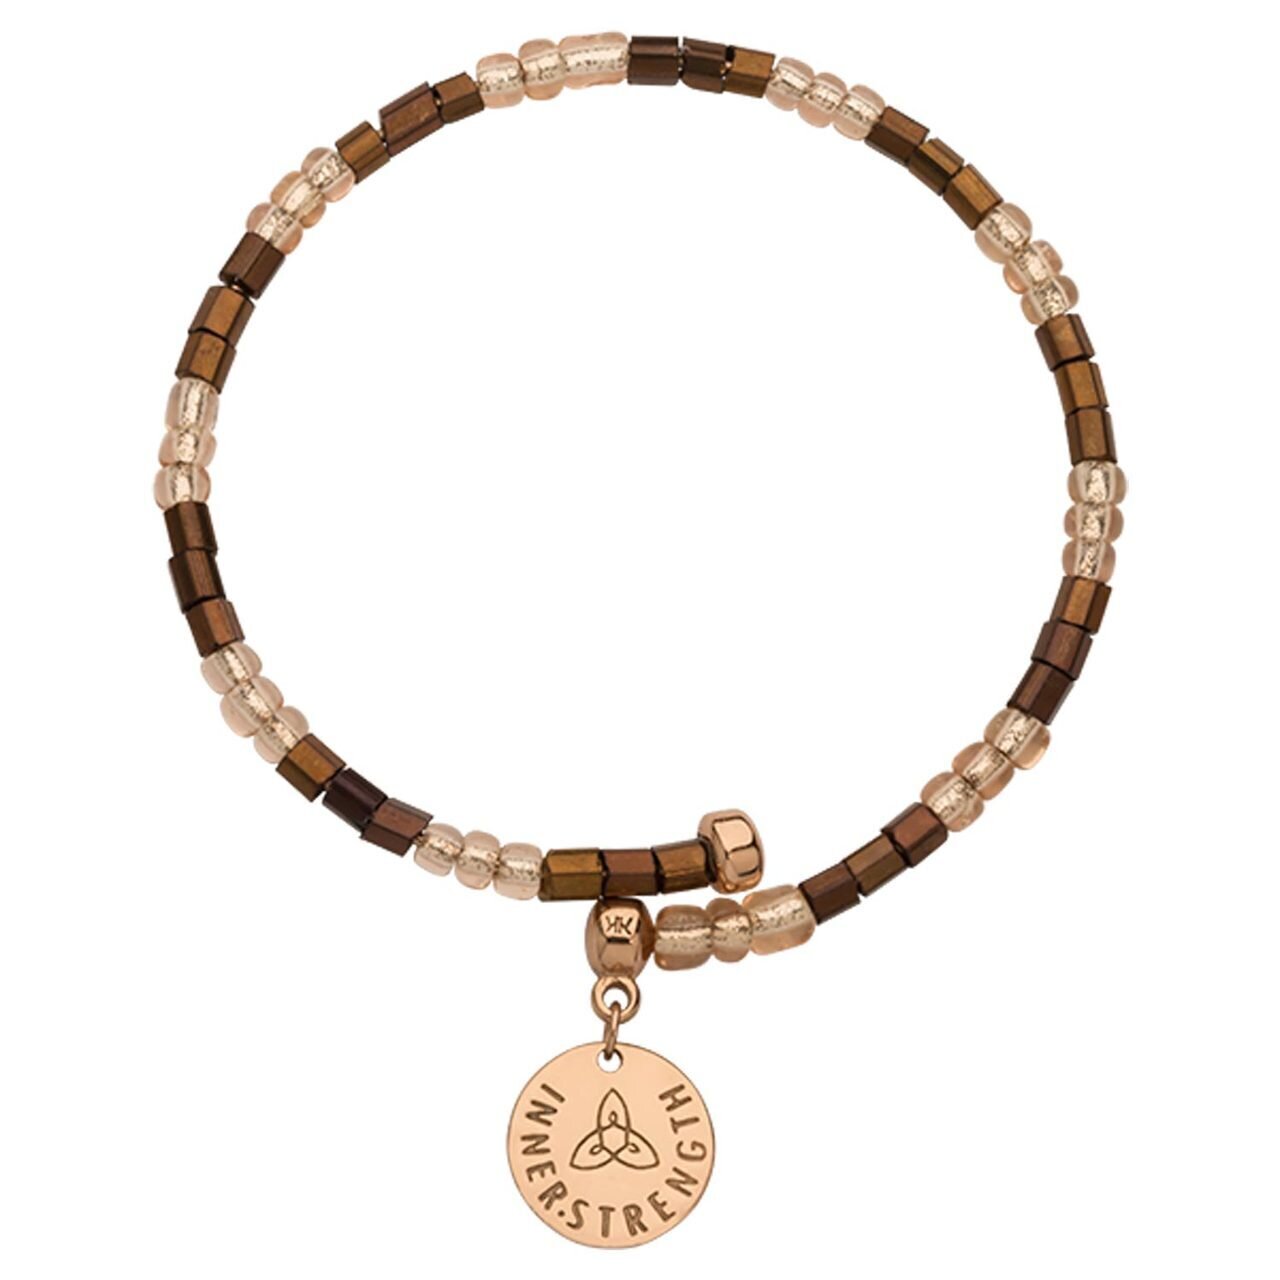 Nikki Lissoni Spiral Bead Bangle Rose Gold-plated with Transparant Brown Beads In 21cm B1138RG21